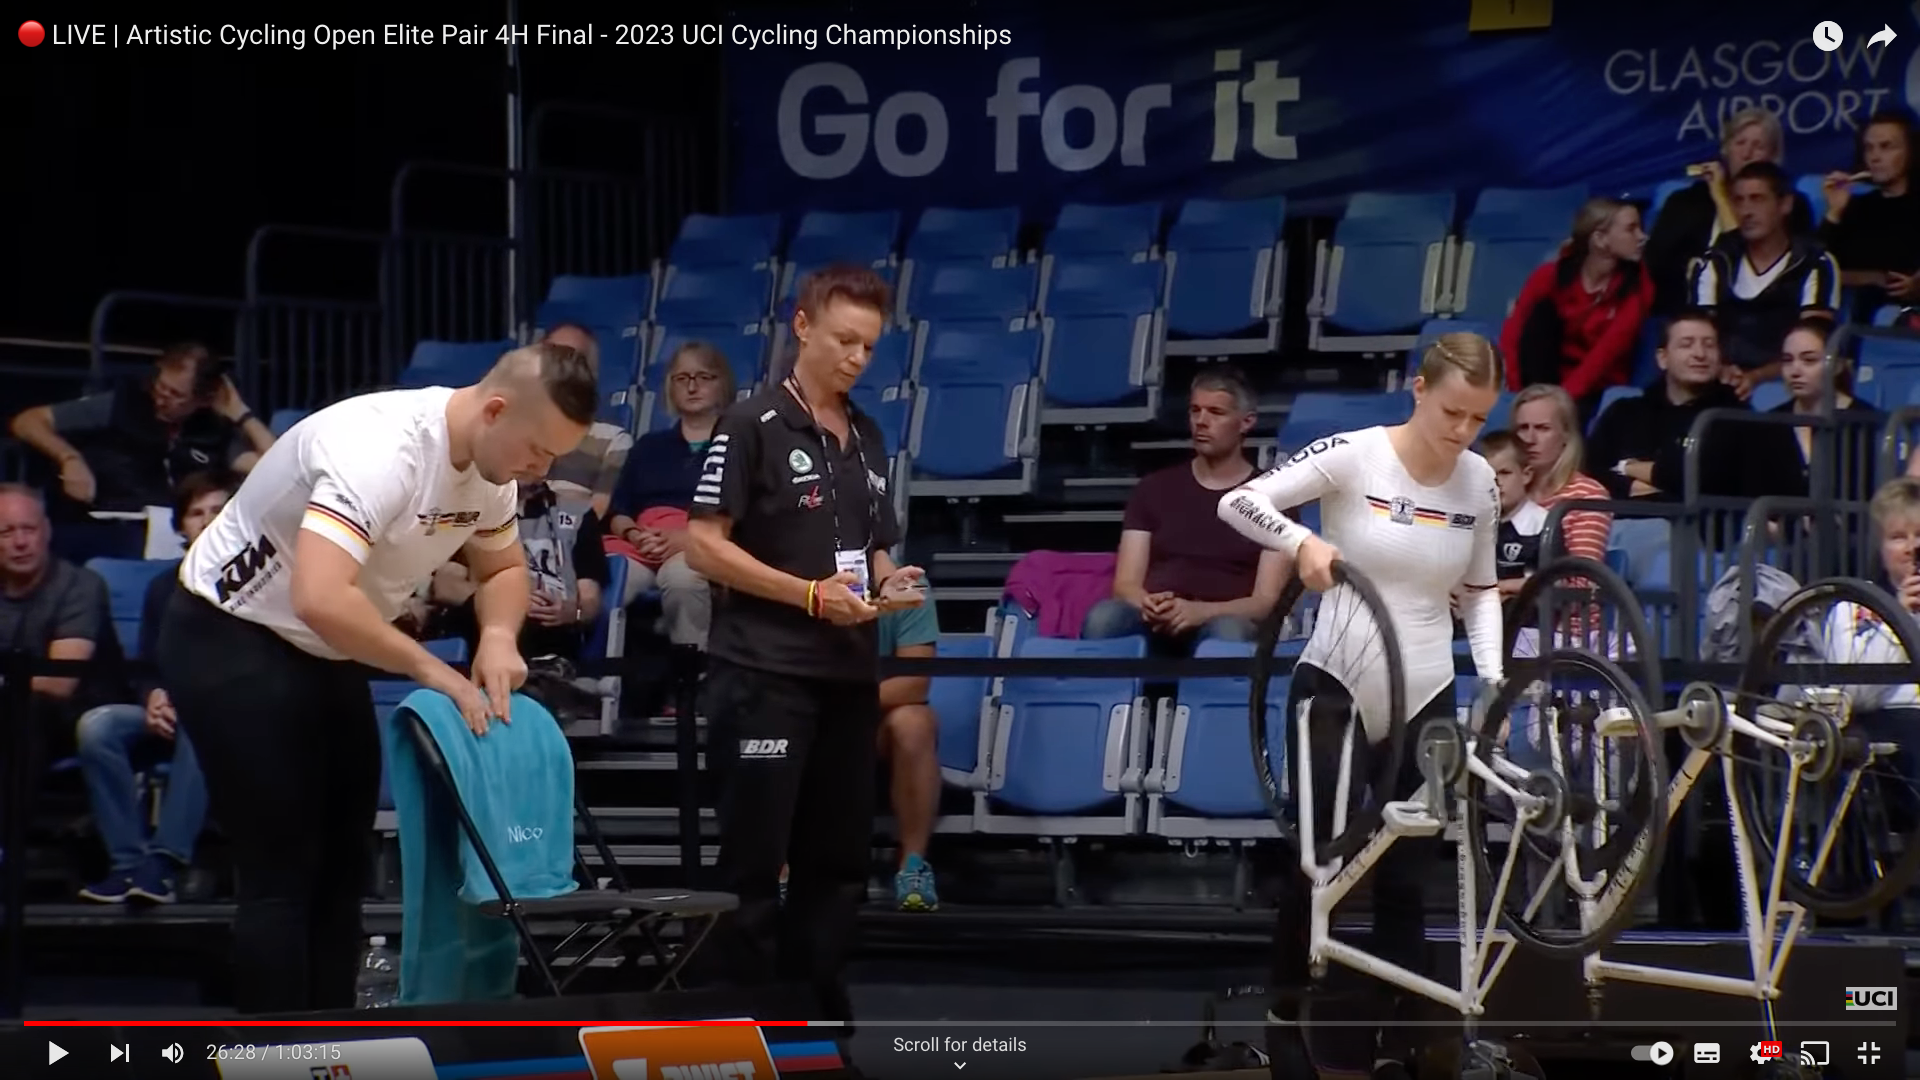 Nico Rödiger and Leah Styber prepare to begin their routine in the elite pairs final. Rödiger is placing a towel with a 'Nico' monogram on his chair on the courtside, carefully smoothing out wrinkles. 